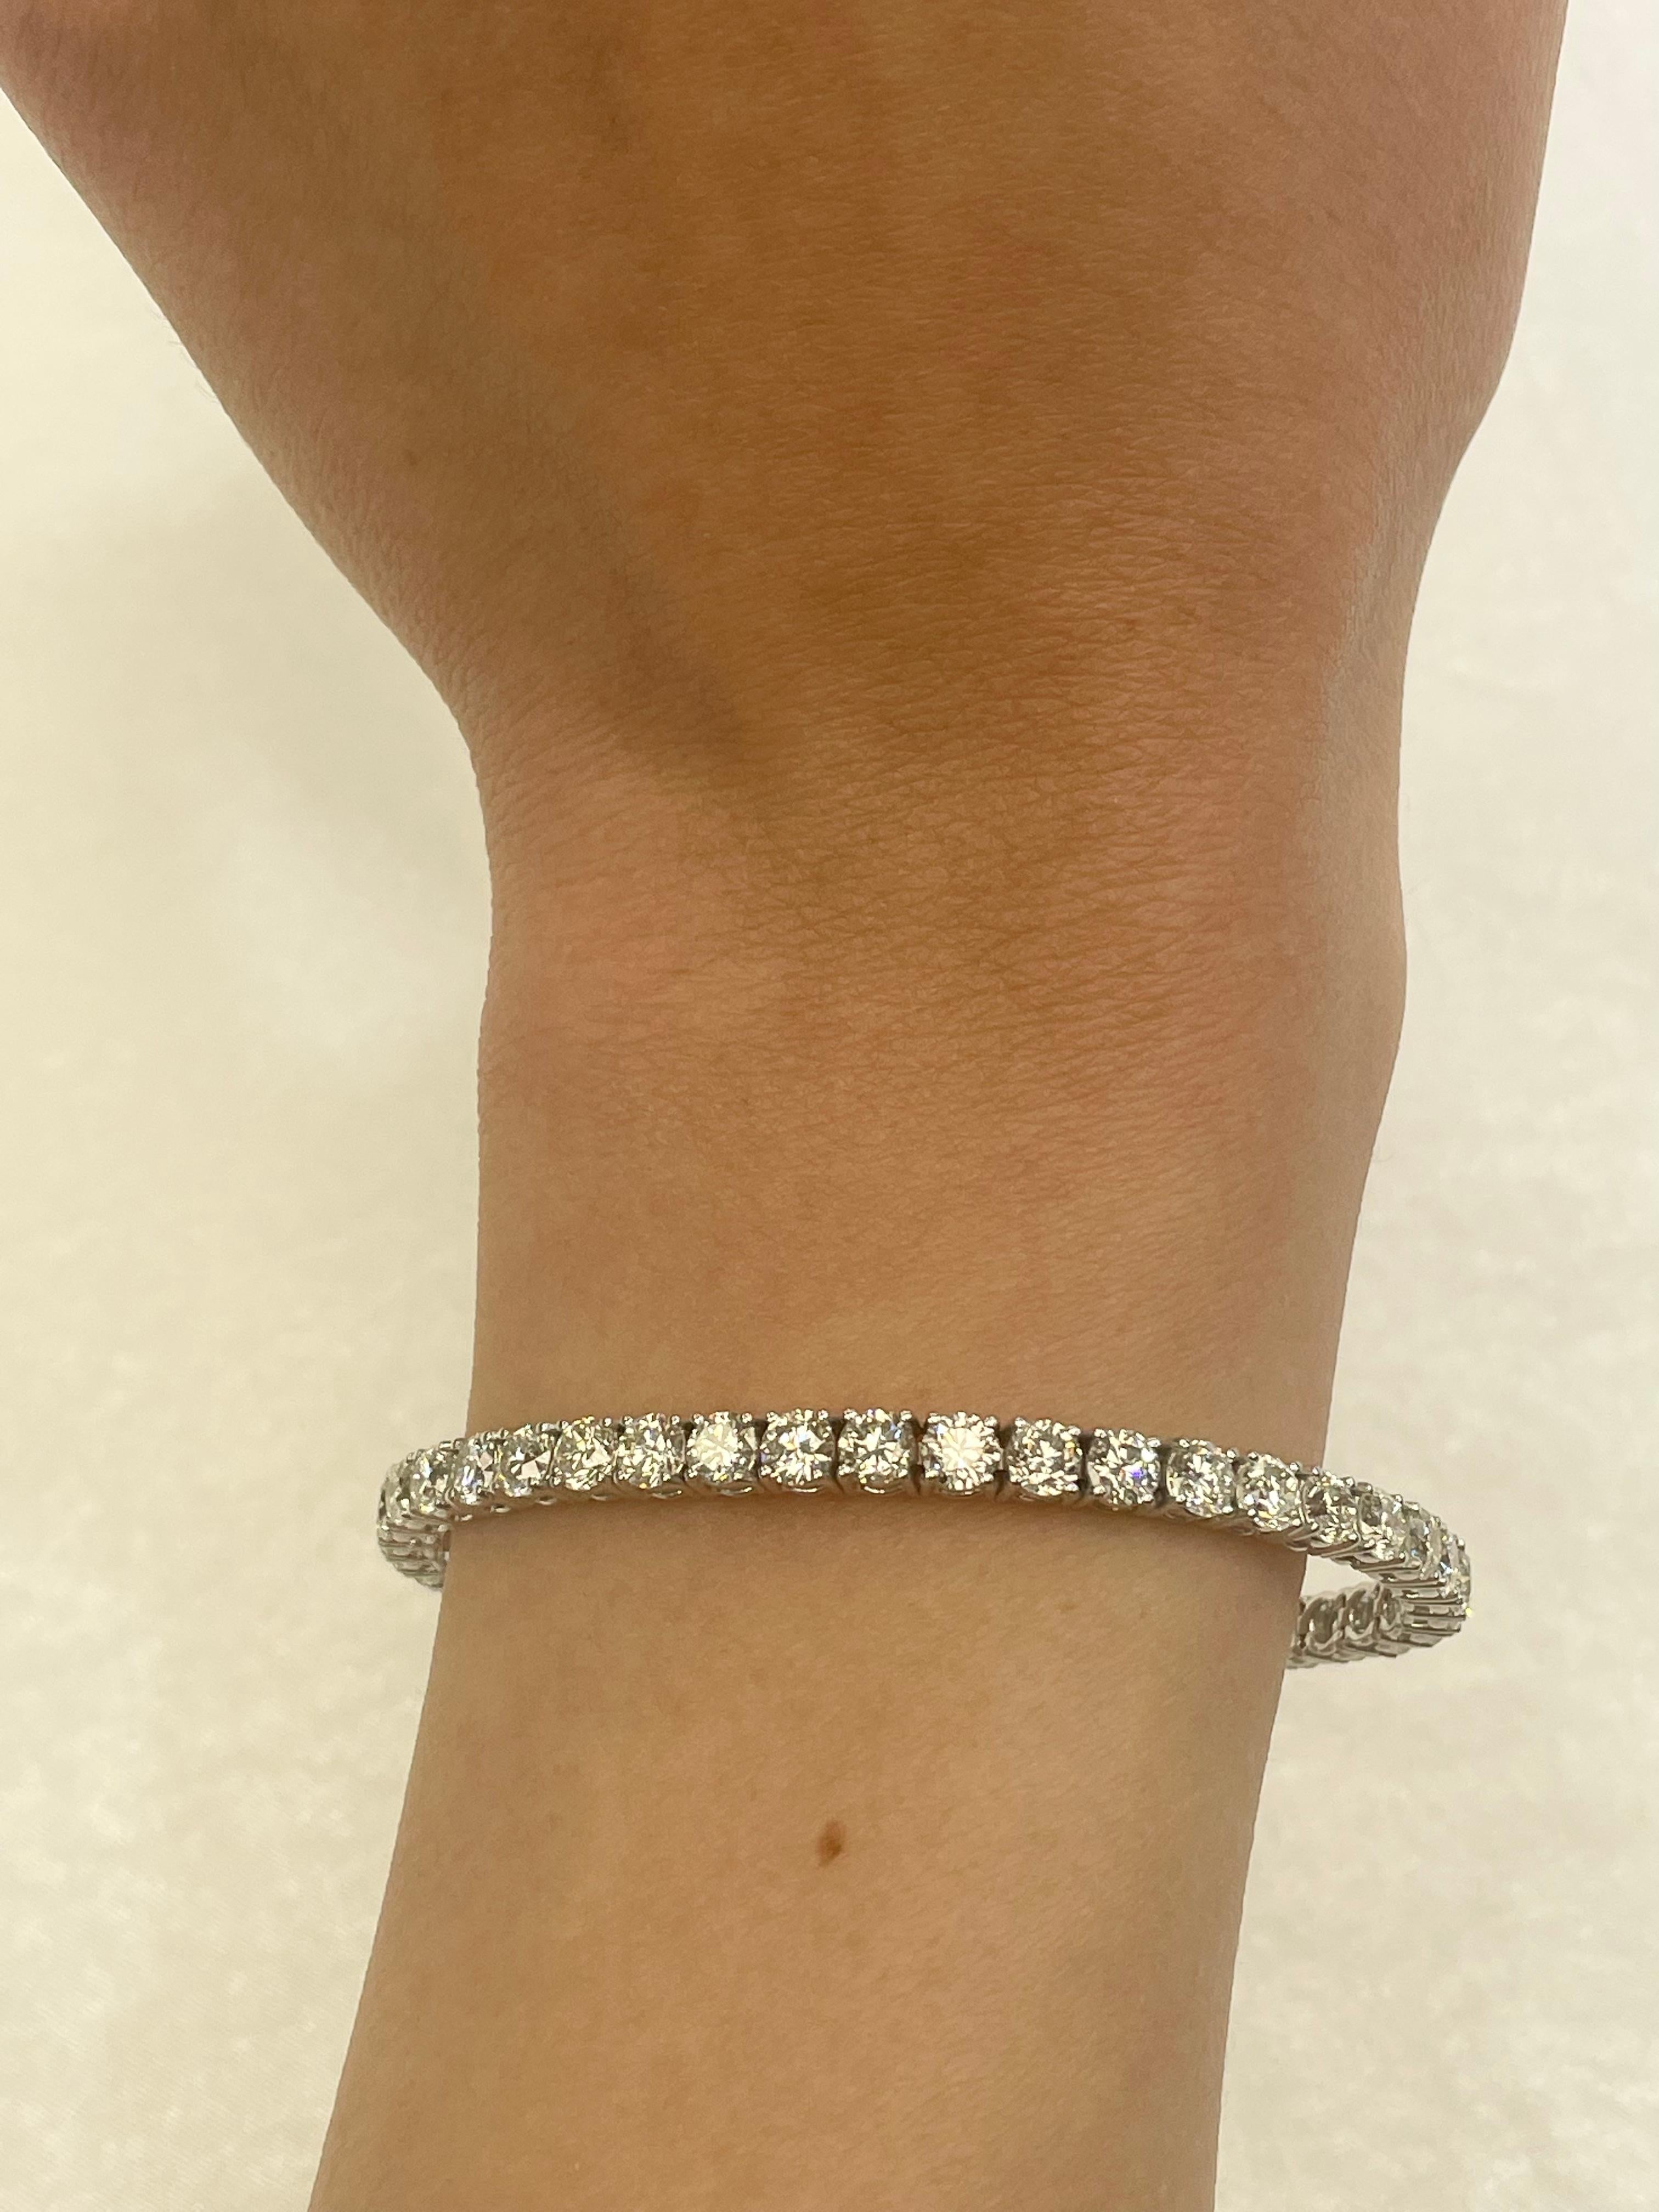 Exquisite and timeless diamonds tennis bracelet, by Alexander Beverly Hills.
42 round brilliant diamonds, 9.88 carats total. Approximately H/J color and VS2/SI1 clarity. Four prong set in 18k white gold, 15.64 grams, 7 inches. 
Accommodated with an